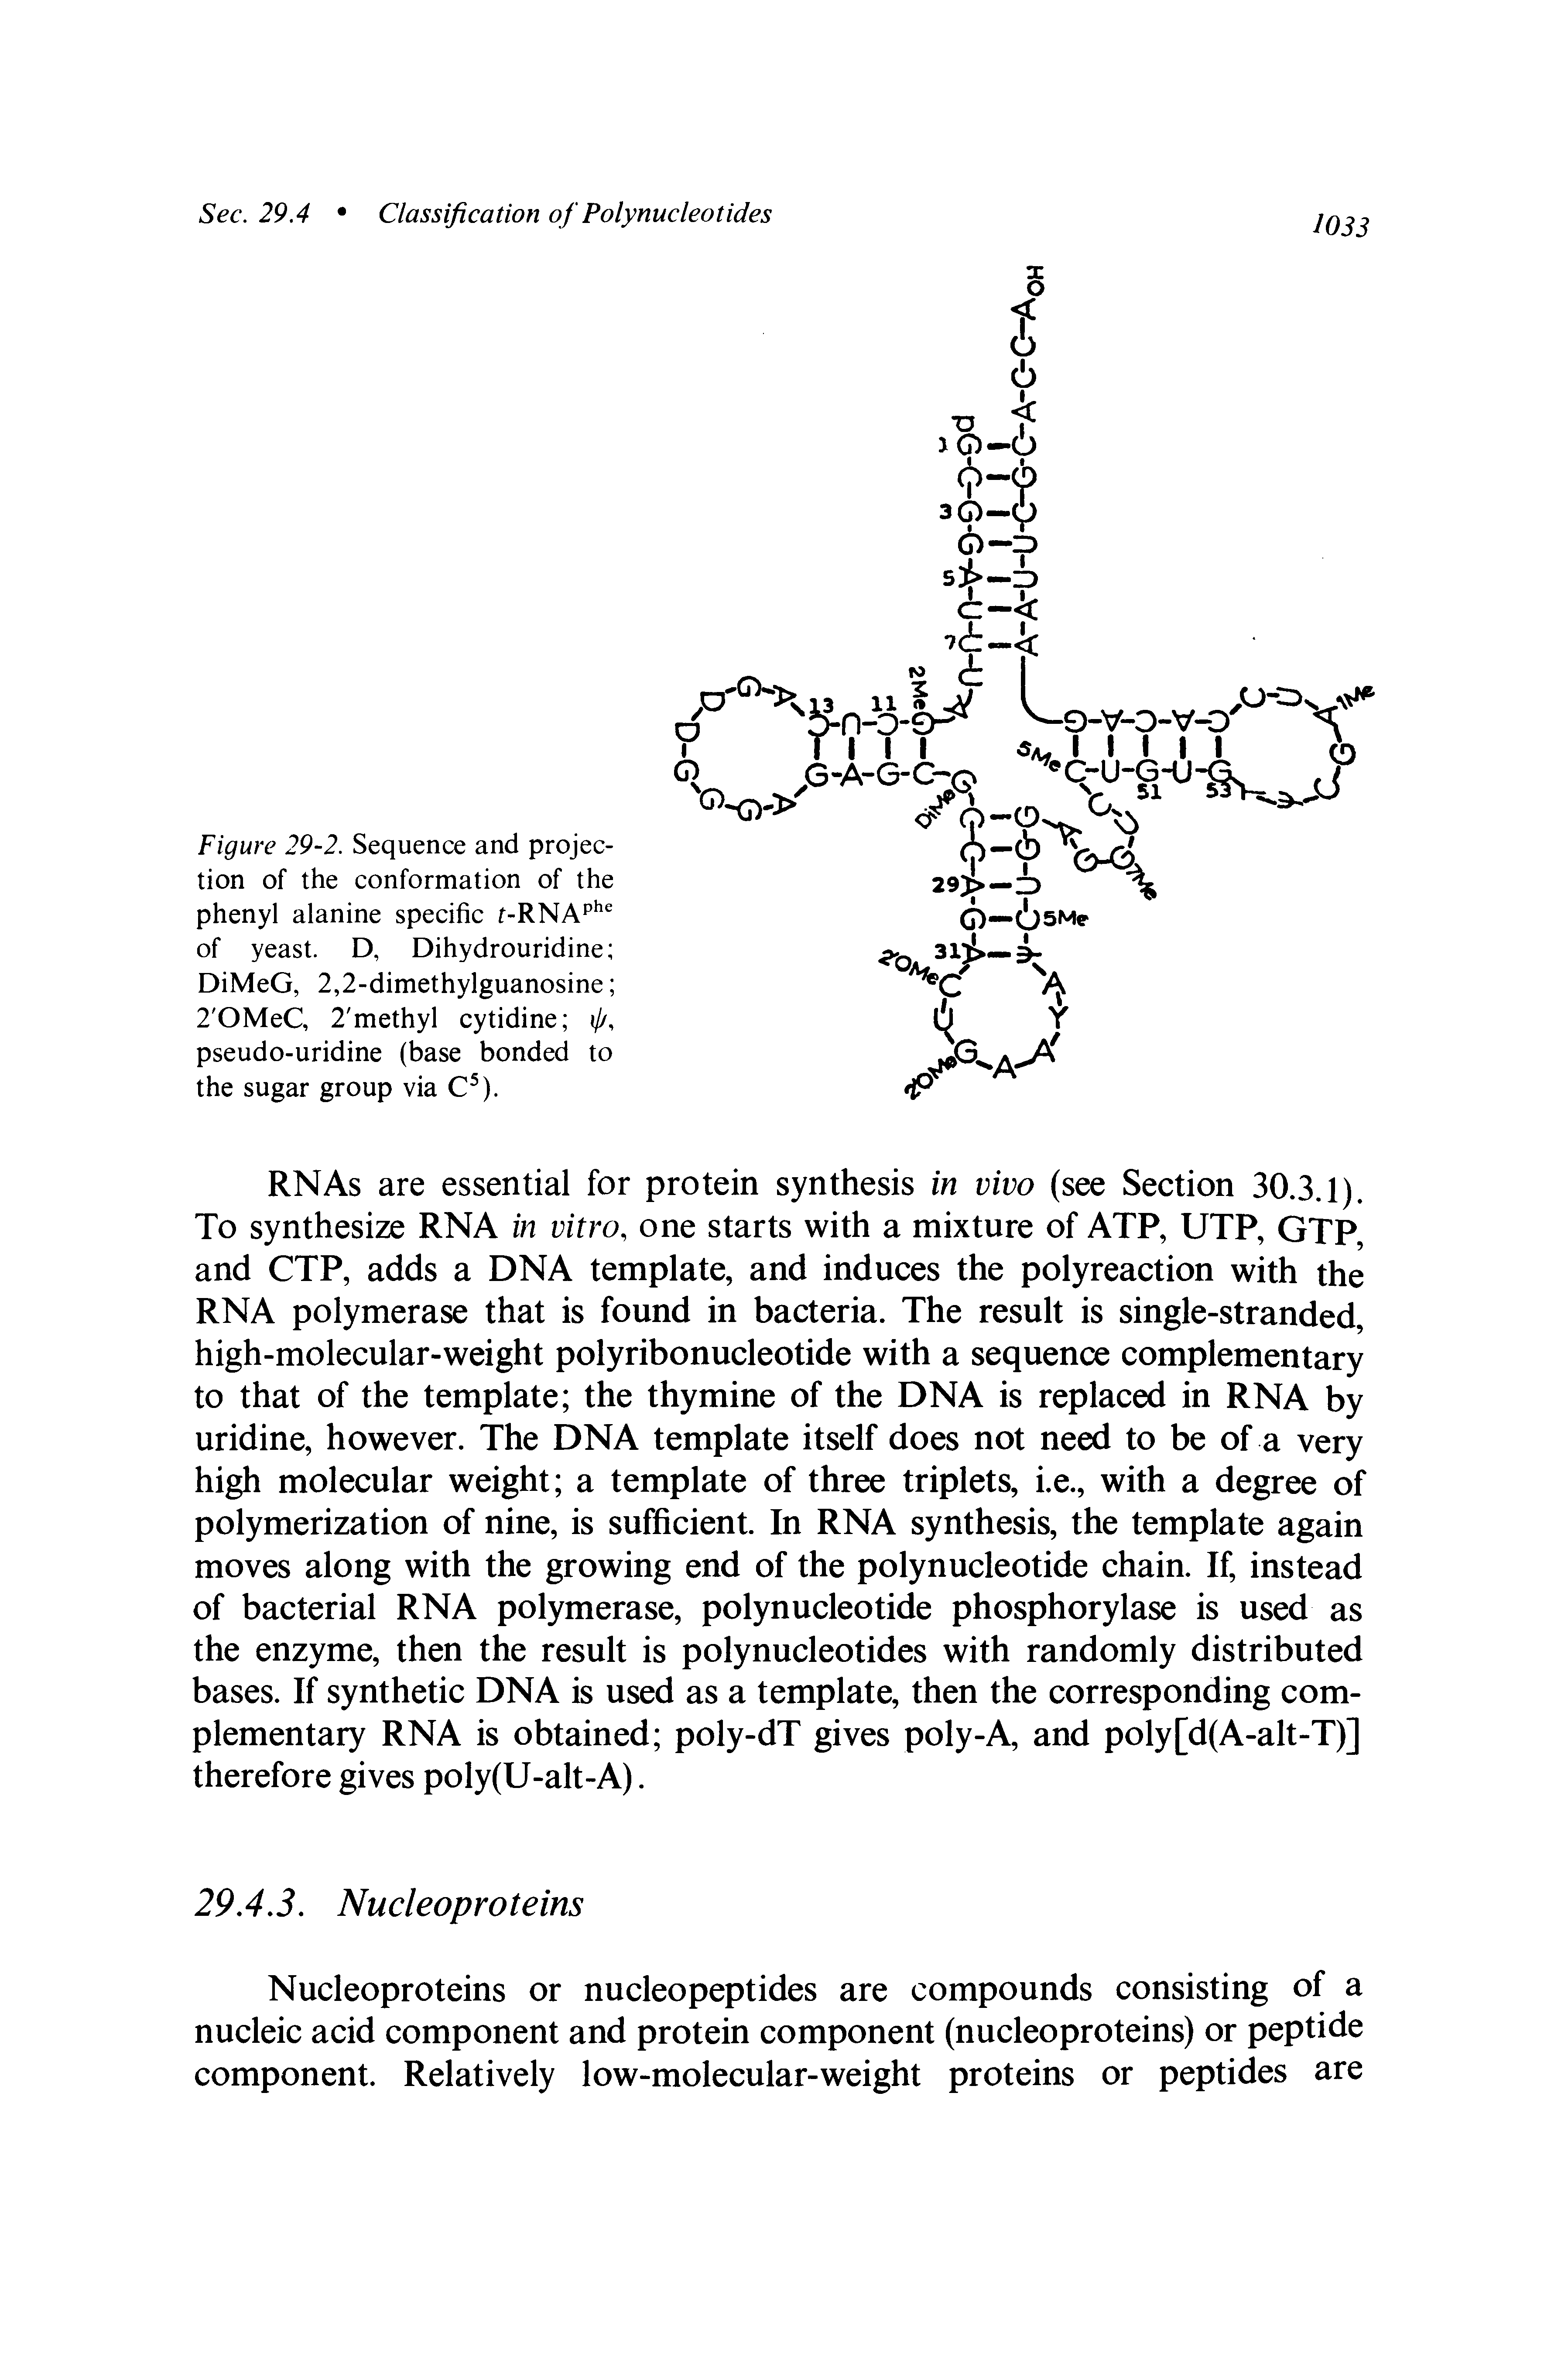 Figure 29-2. Sequence and projection of the conformation of the phenyl alanine specific f-RNAP " of yeast. D, Dihydrouridine DiMeG, 2,2-dimethylguanosine 2 OMeC, 2 methyl cytidine ij/, pseudo-uridine (base bonded to the sugar group via C ).